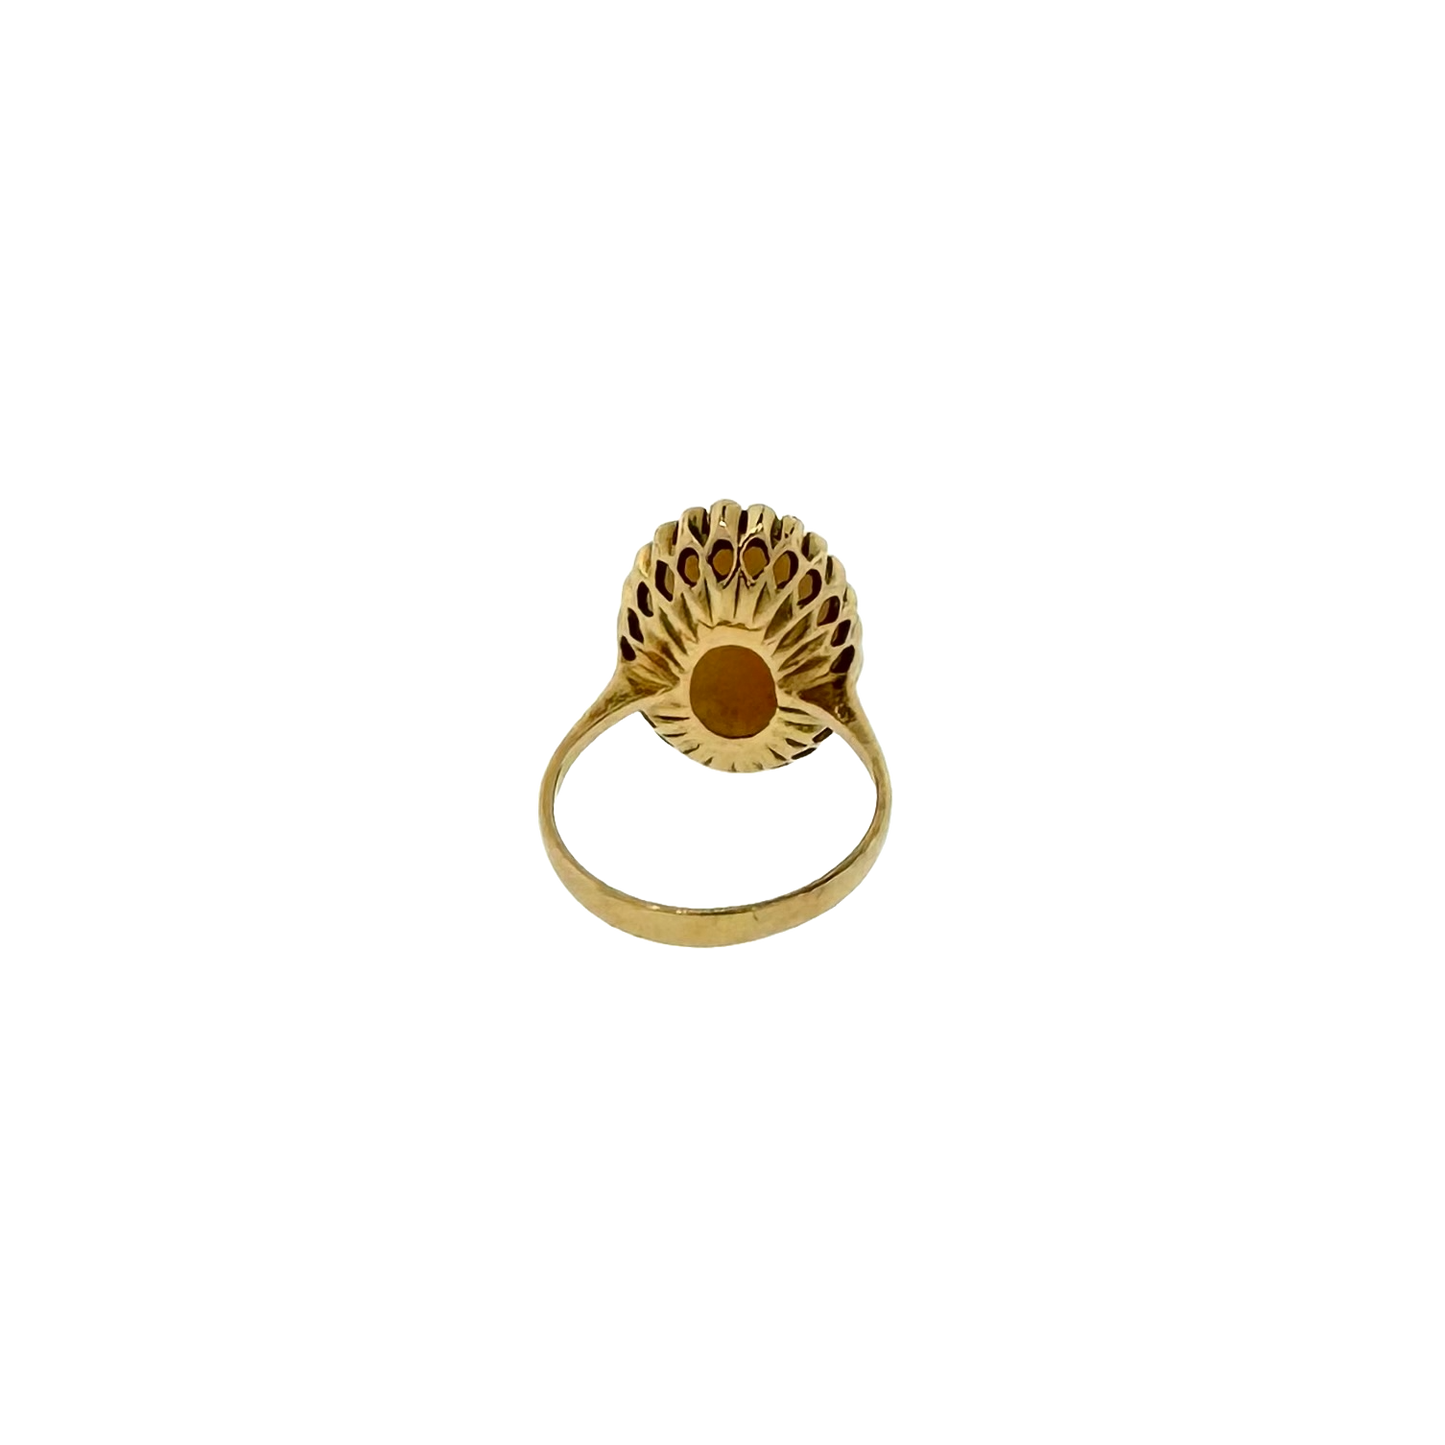 Estate 18k + Oval Shell Cameo Ring